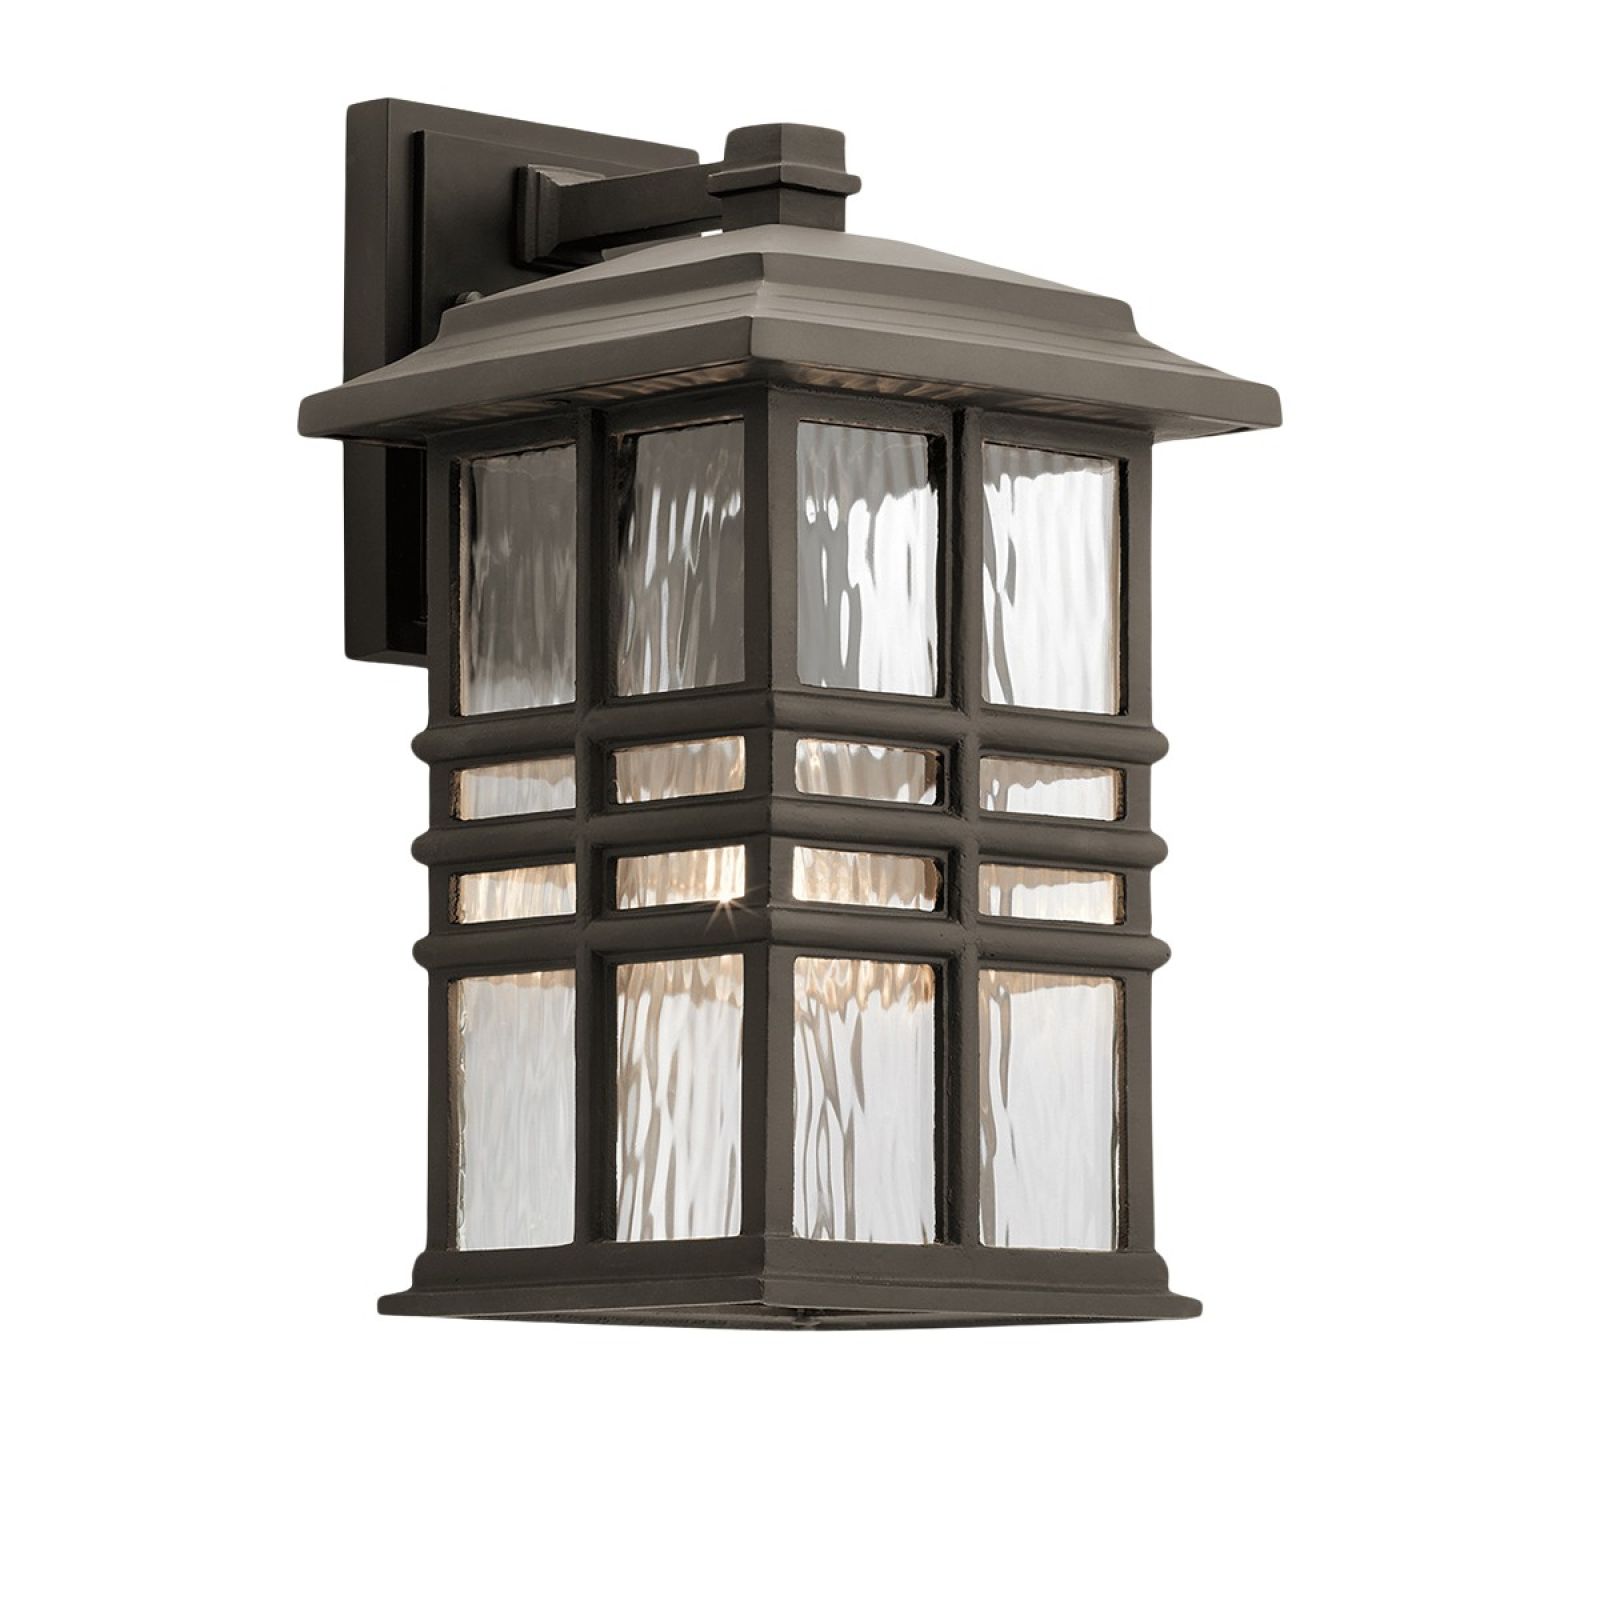 Beacon exterior wall light in bronze in a choice of sizes